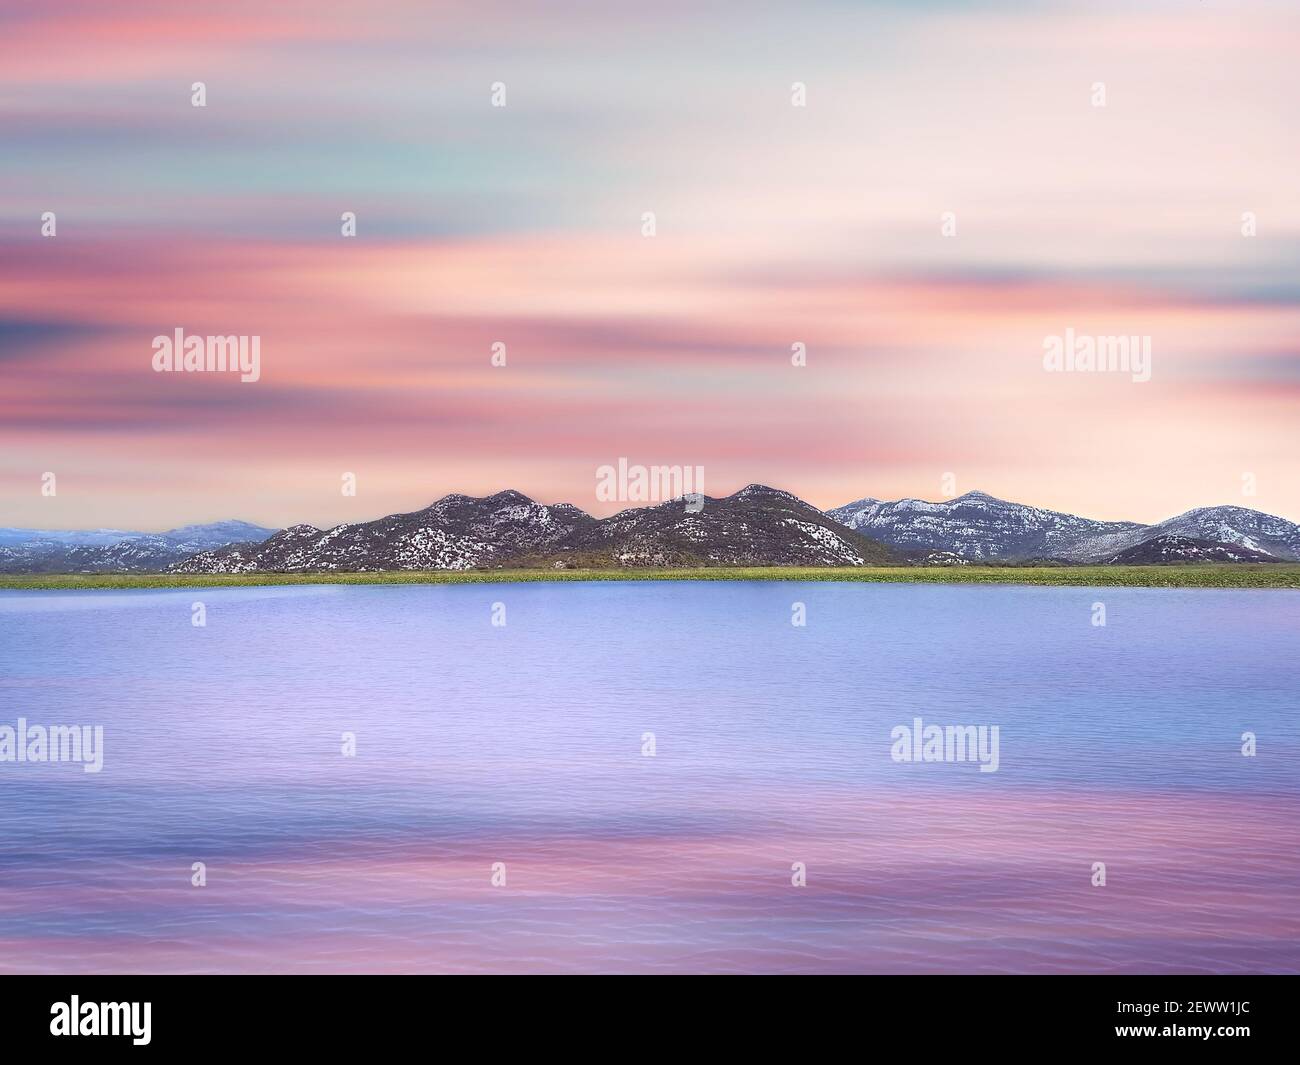 Scenic view of lake skadar and mountains at sunset, Lake in Europe. Stock Photo